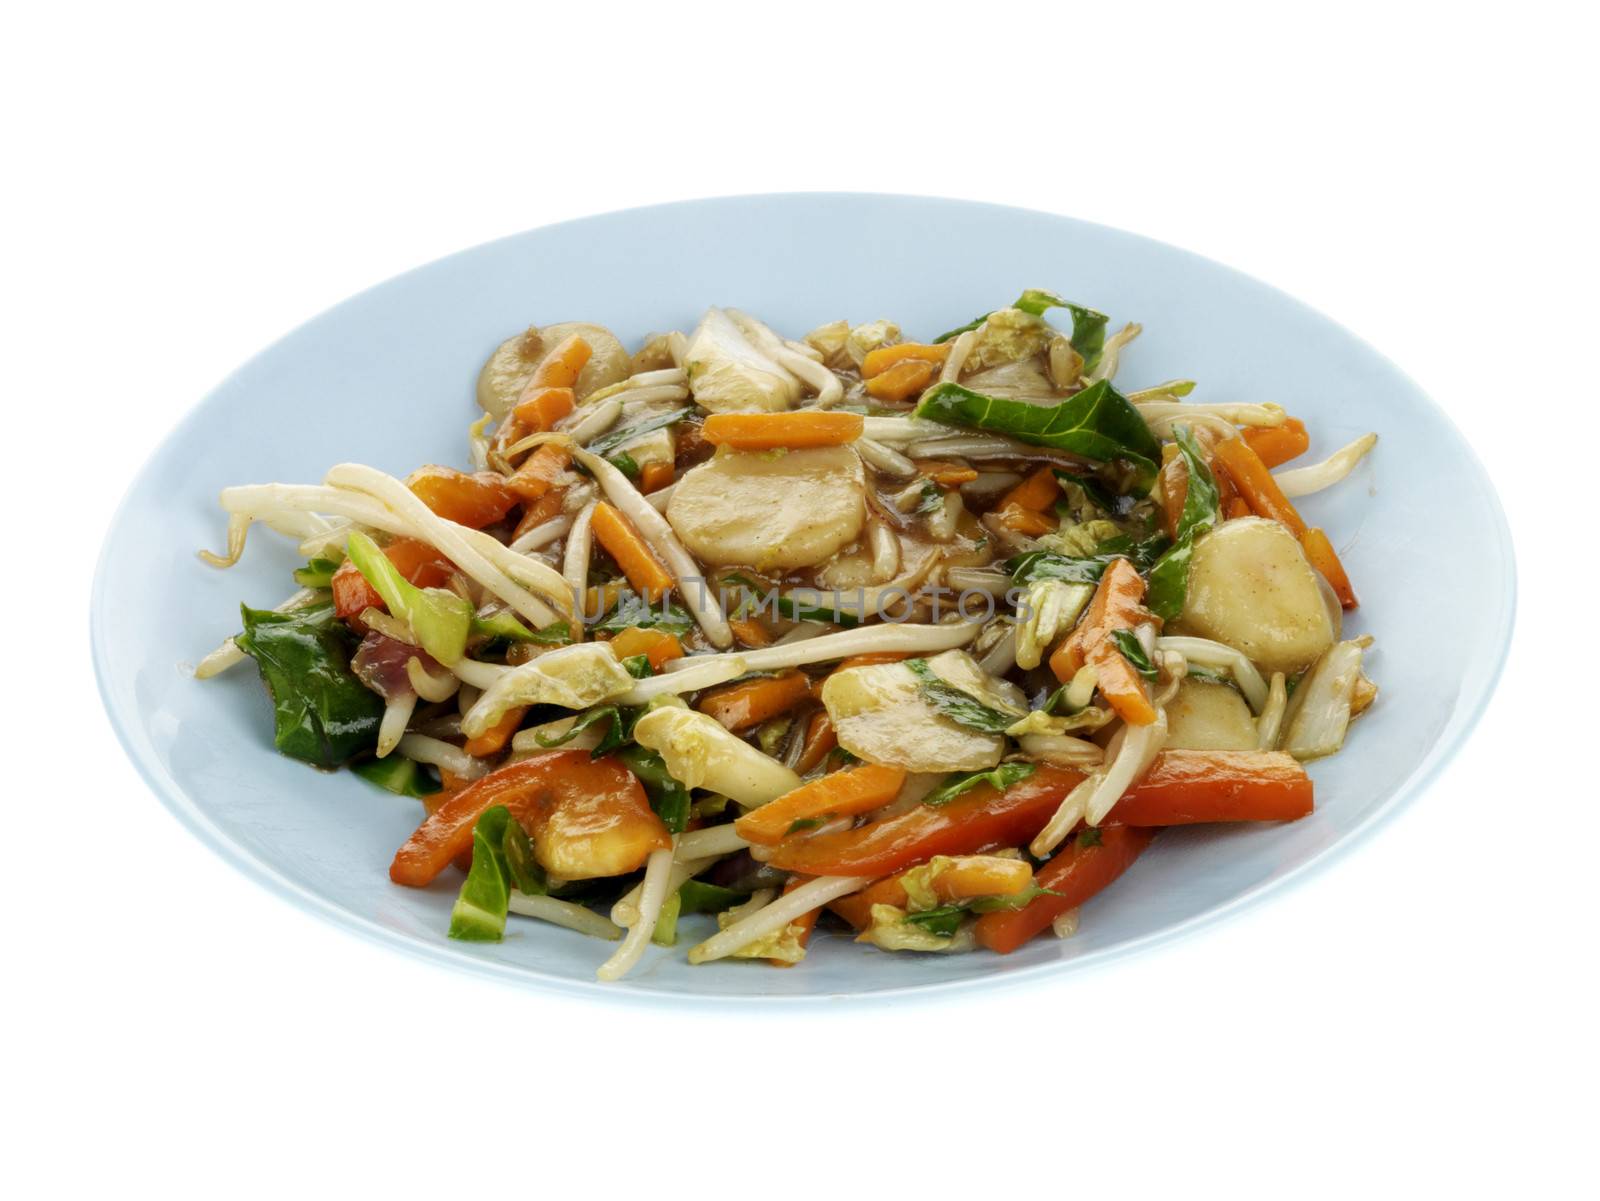 Stirfry Vegetables in Chow Mein Sauce